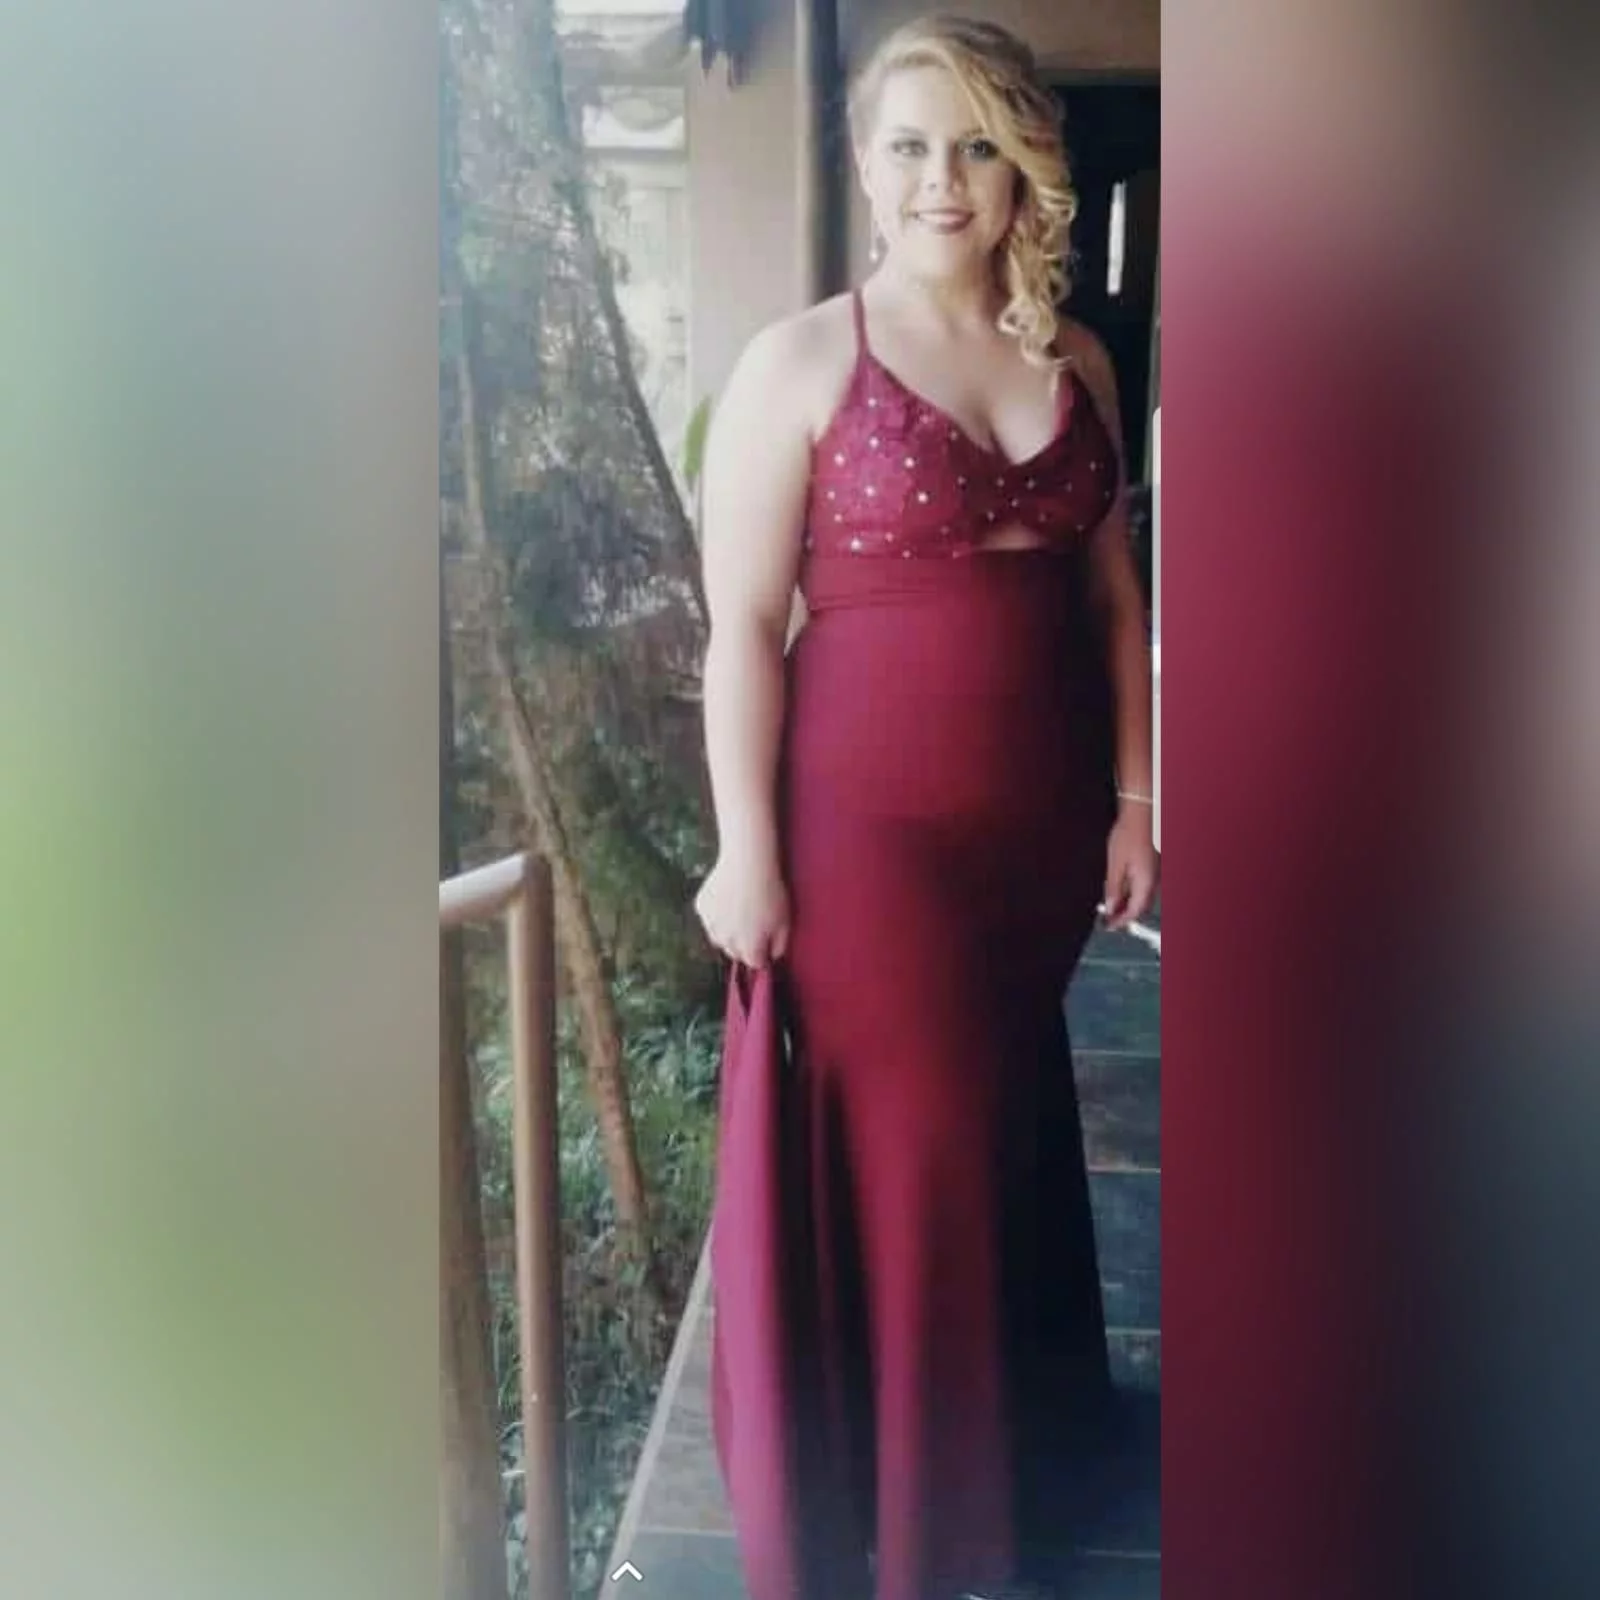 Burgundy soft mermaid plus size prom dress 6 burgundy soft mermaid plus size prom dress. Bodice detailed with lace and silver beads, small triangle opening on the waist with waistband finish. Open laceup back and a train.